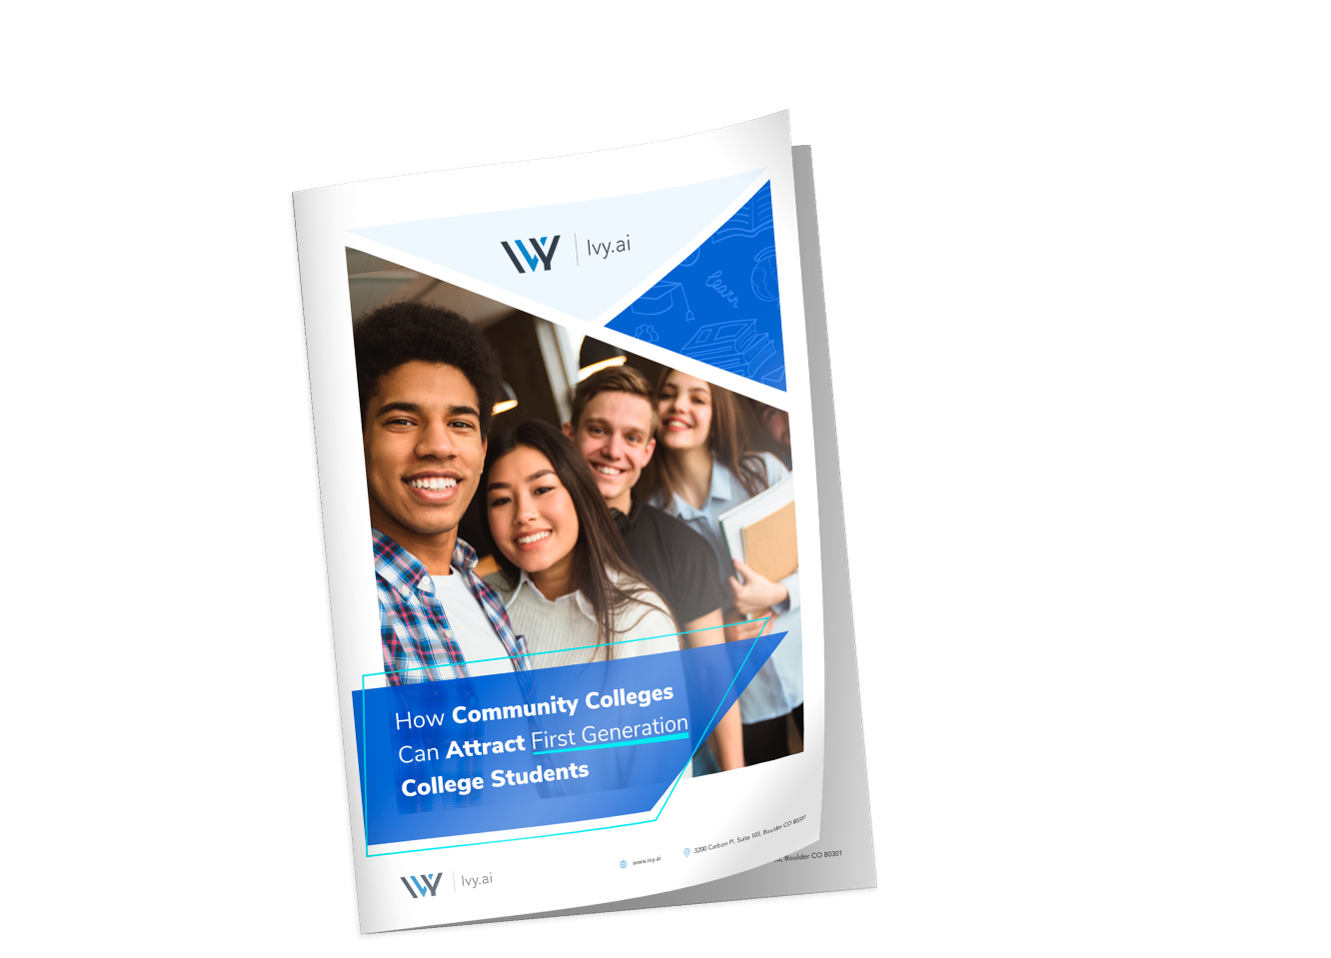 White Paper - How Community Colleges Can Attract More First Generation College Students